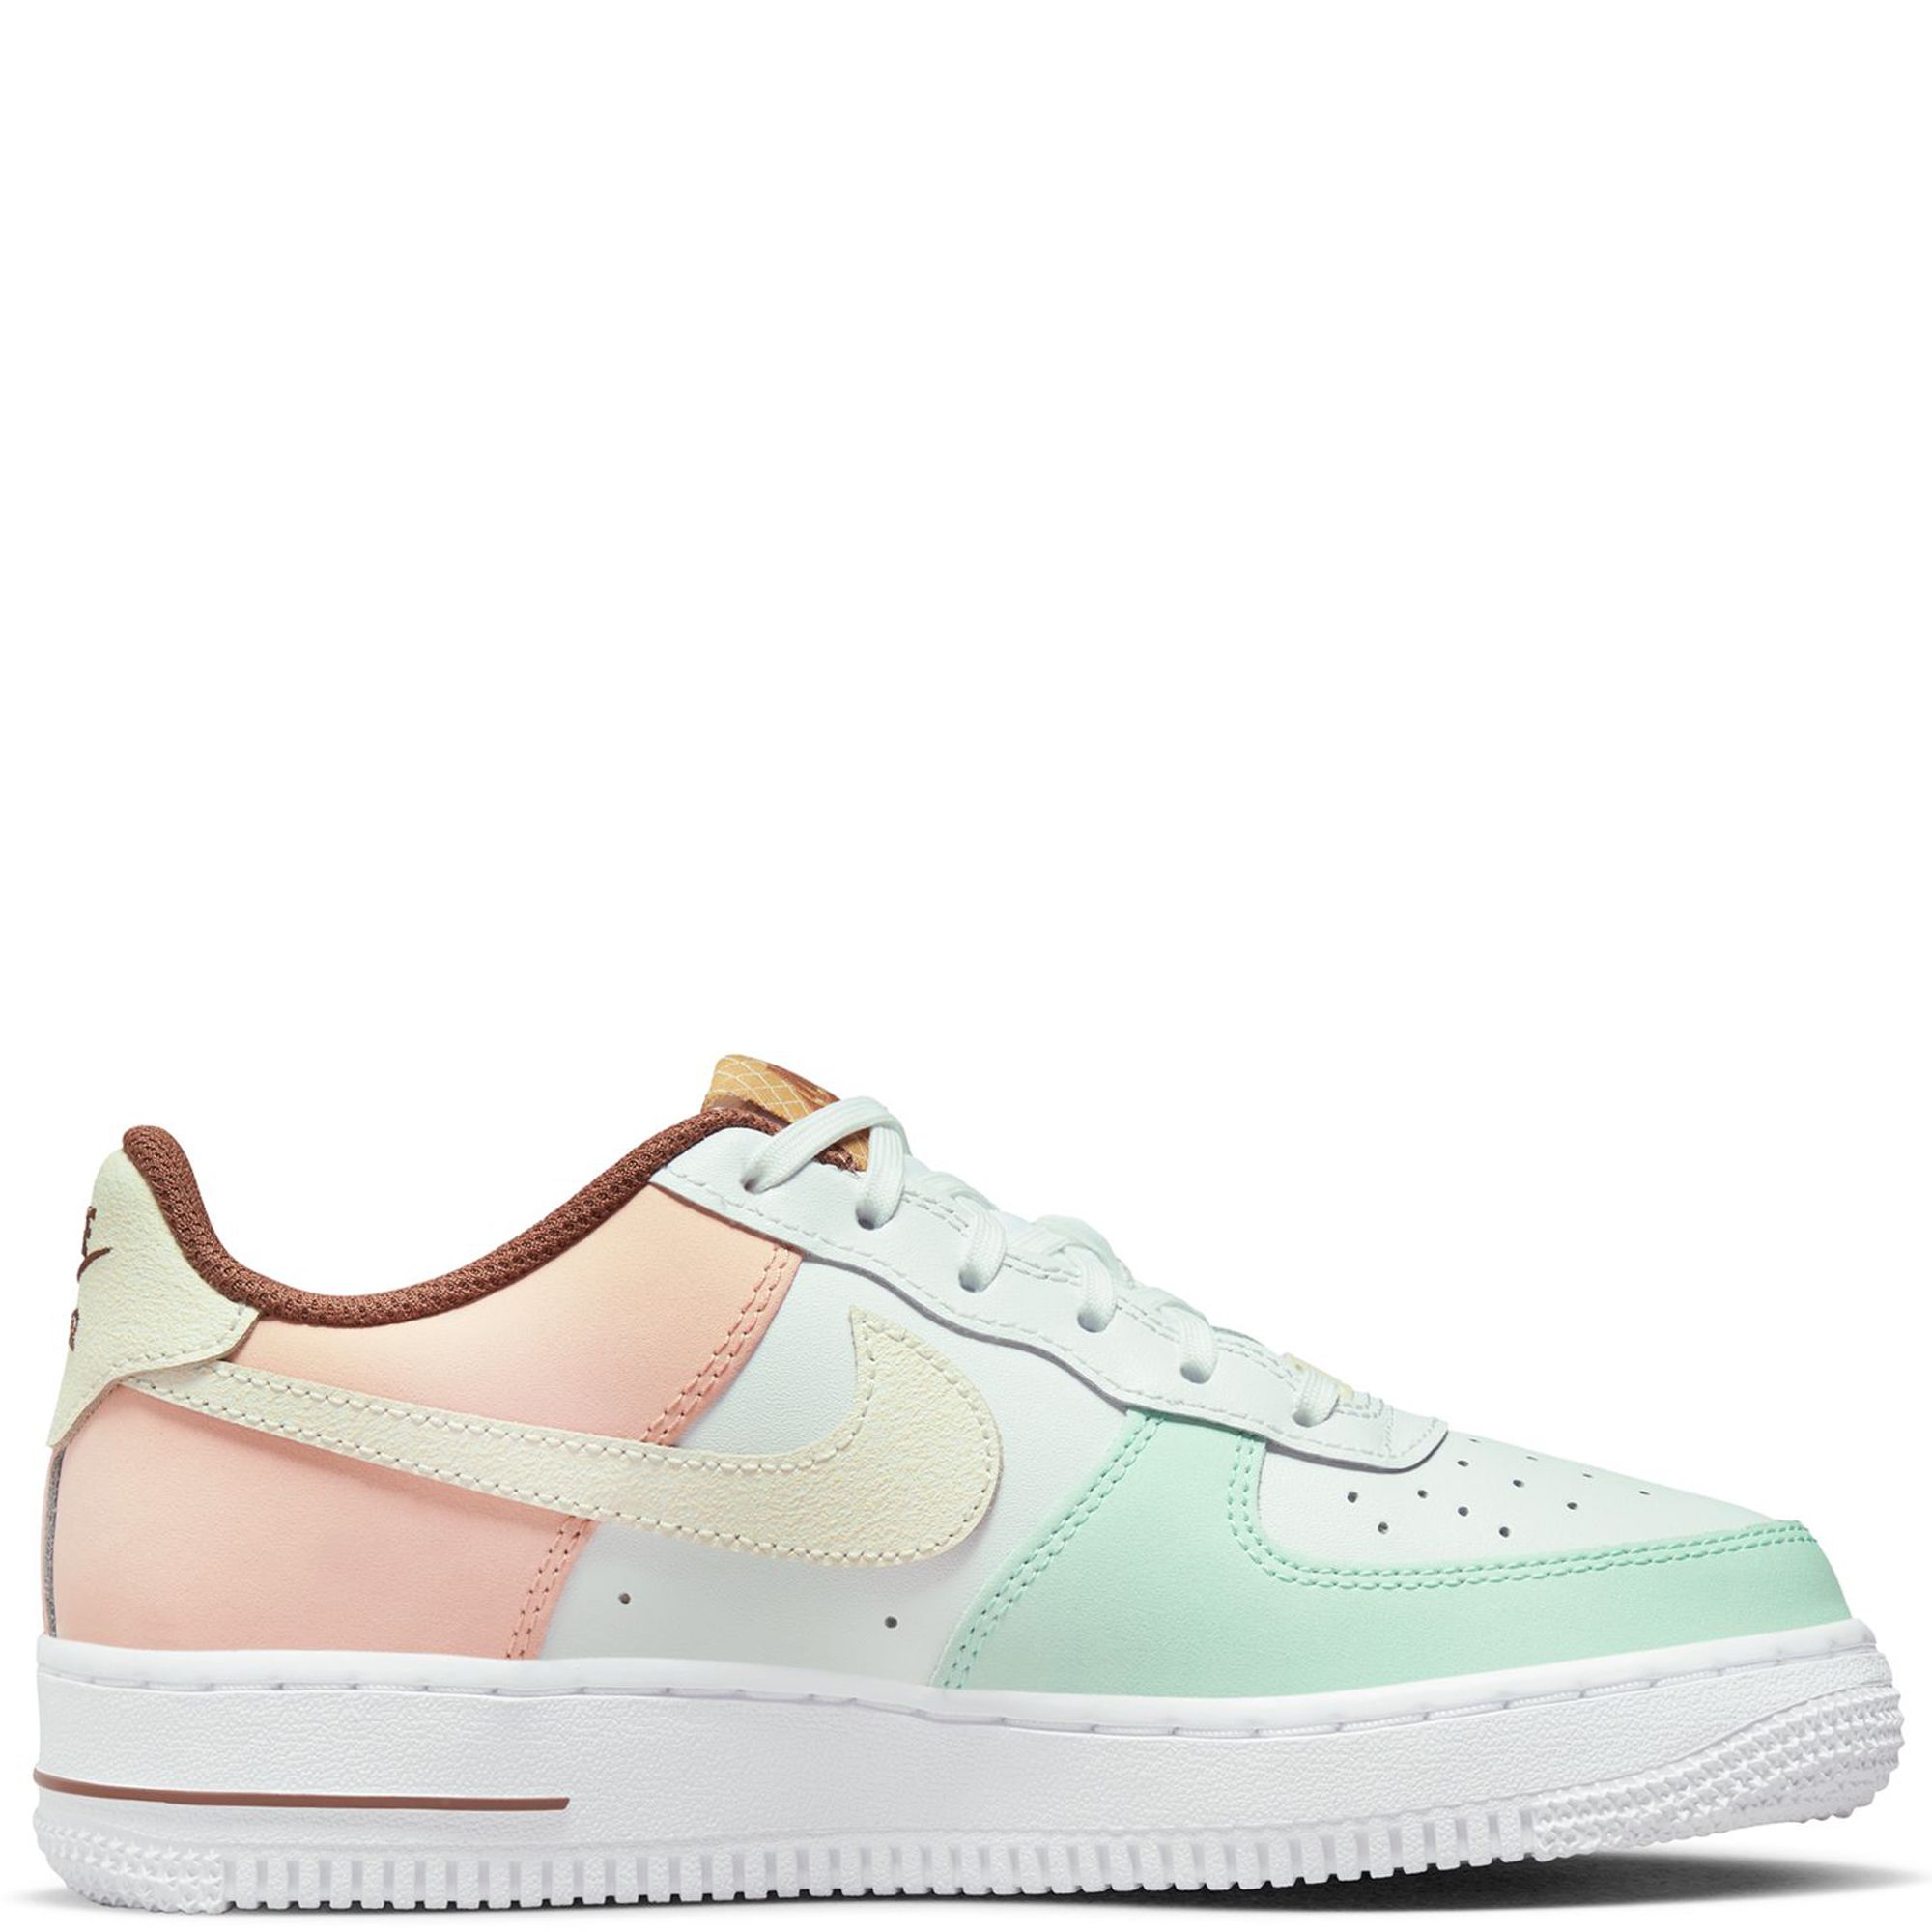 Nike Air Force 1 Low LVL 8 Ice Cream (GS)